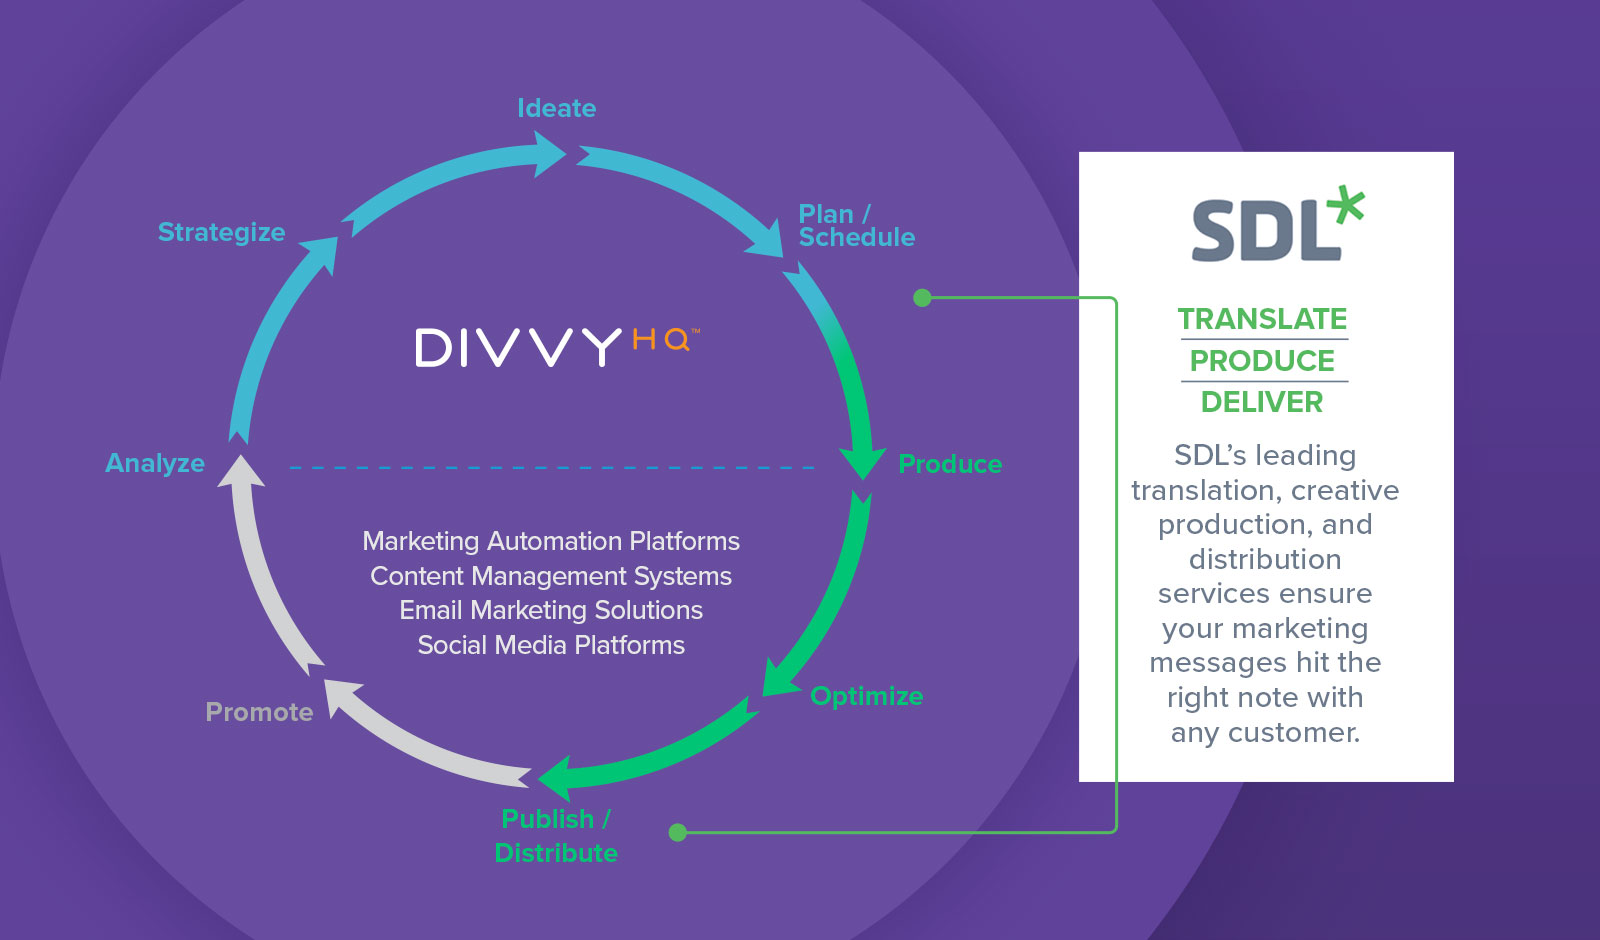 SDL's translation, creative production and delivery services align with DivvyHQ's focus on process management.